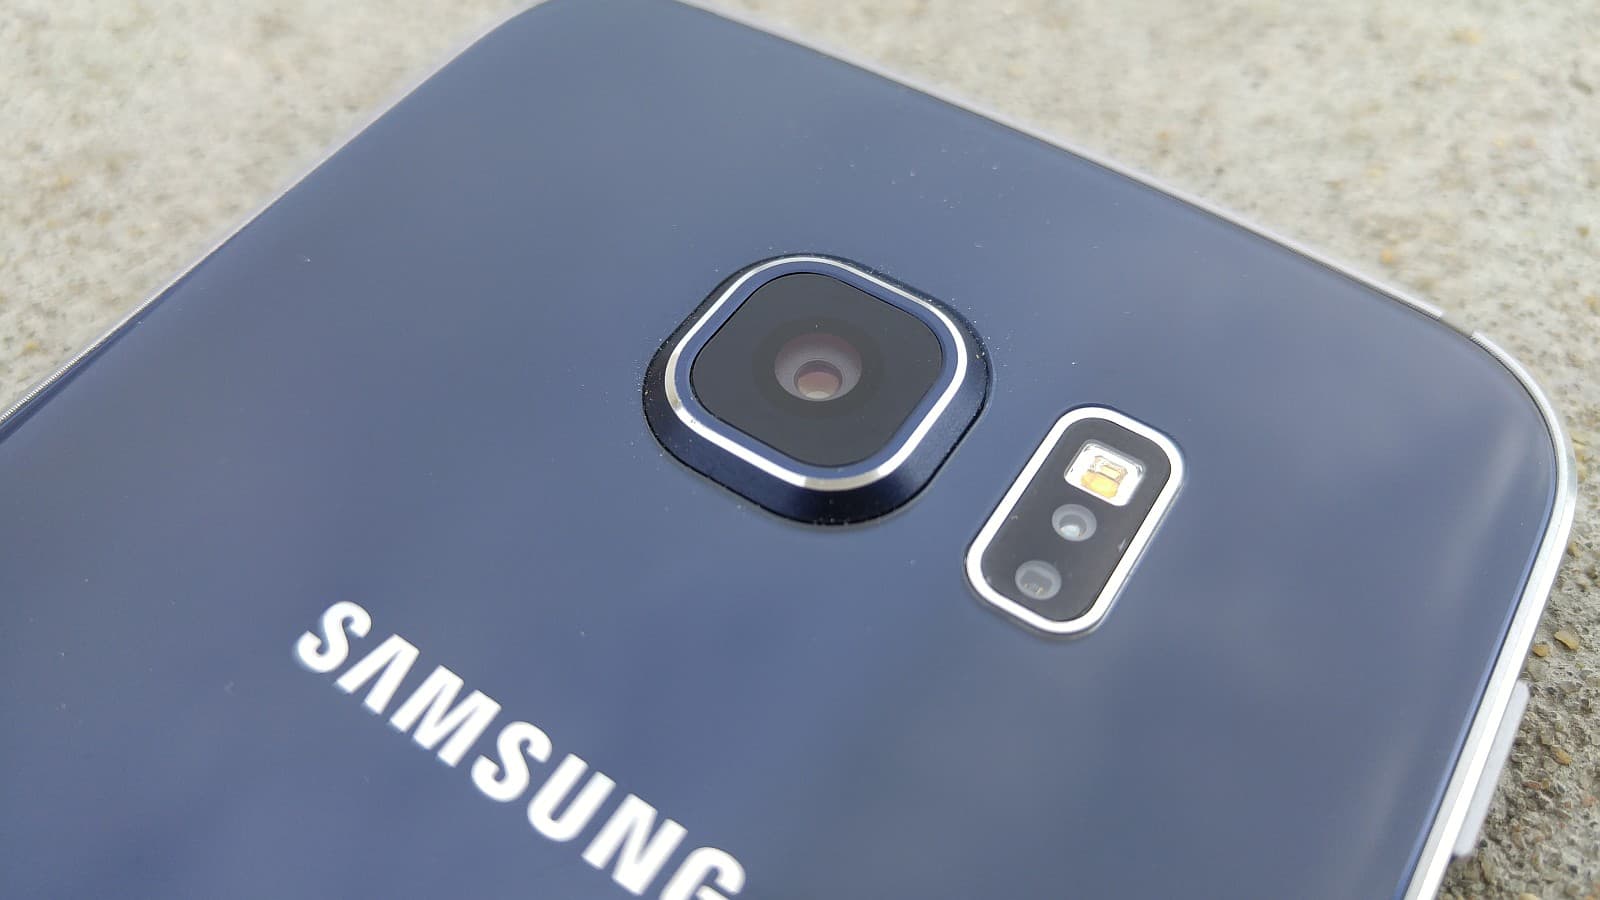 Samsung has unveiled the BRITECELL camera technology at the Samsung Investors Forum 2015. Image Credit: TcpHub